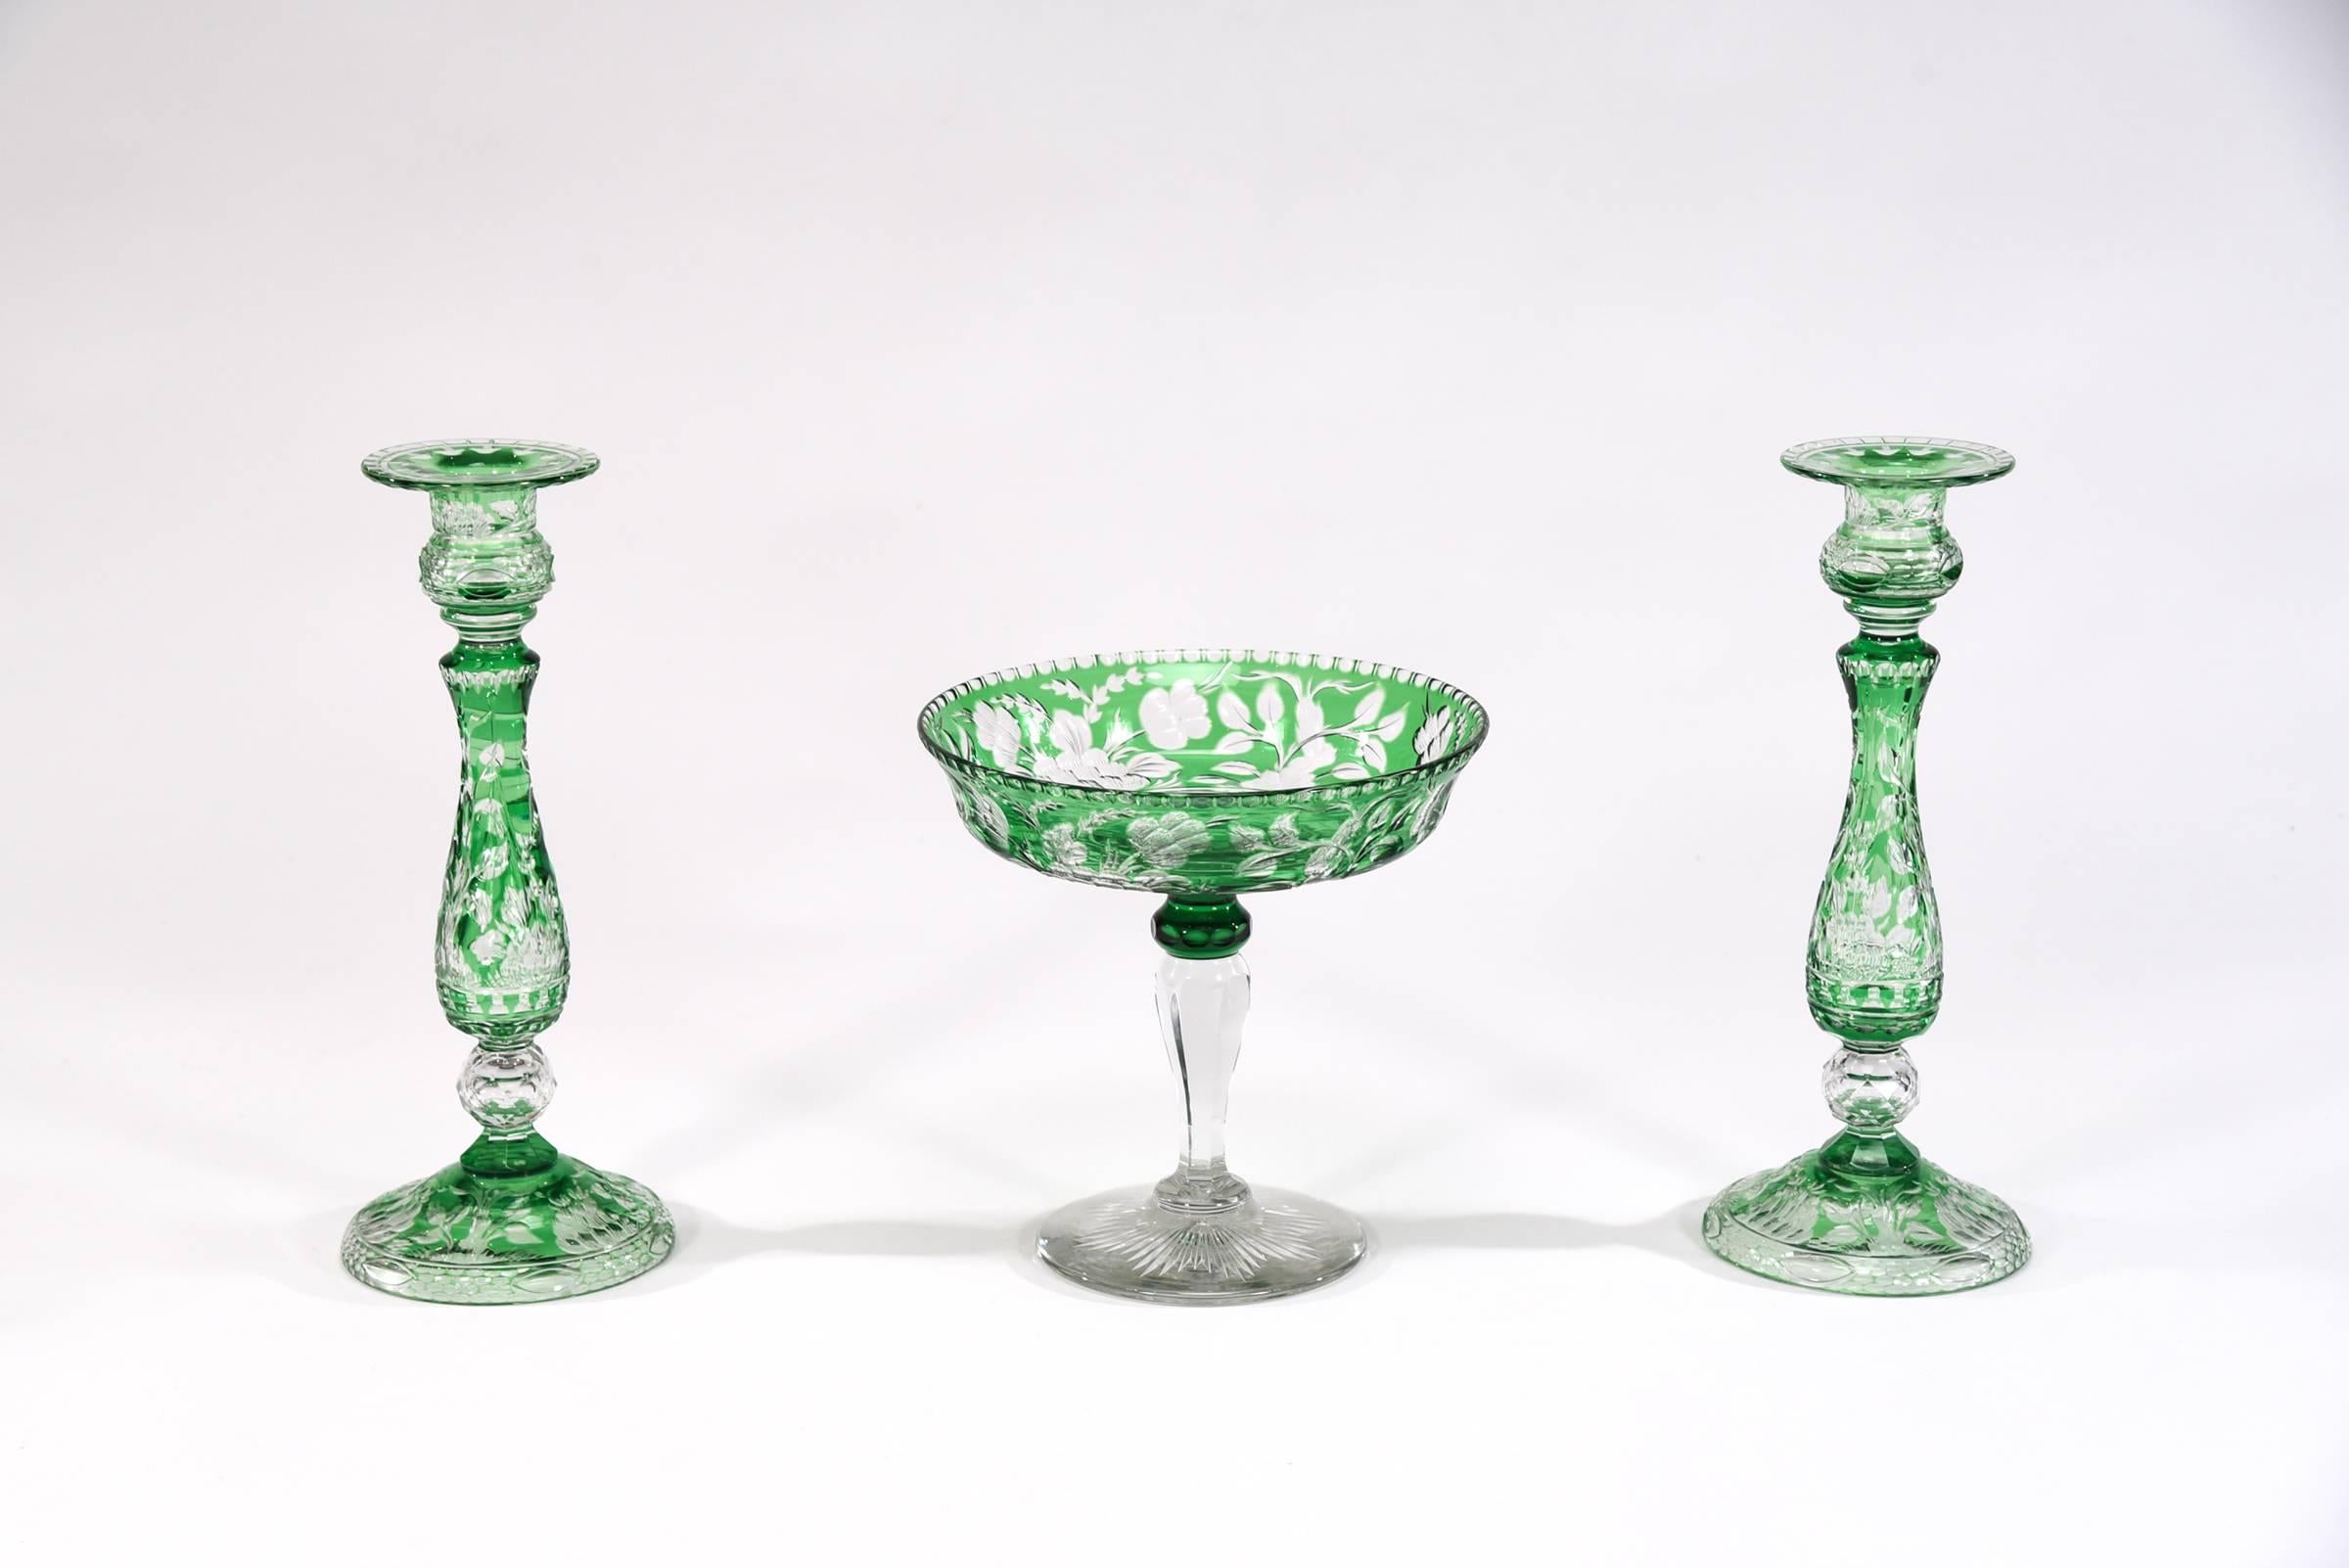 This is an extremely rare and complete Stevens and Williams handblown crystal centrepiece set. It features a pair of matched handblown candlesticks with emerald green overlay and intricately cut to clear in one of their iconic floral Art Nouveau